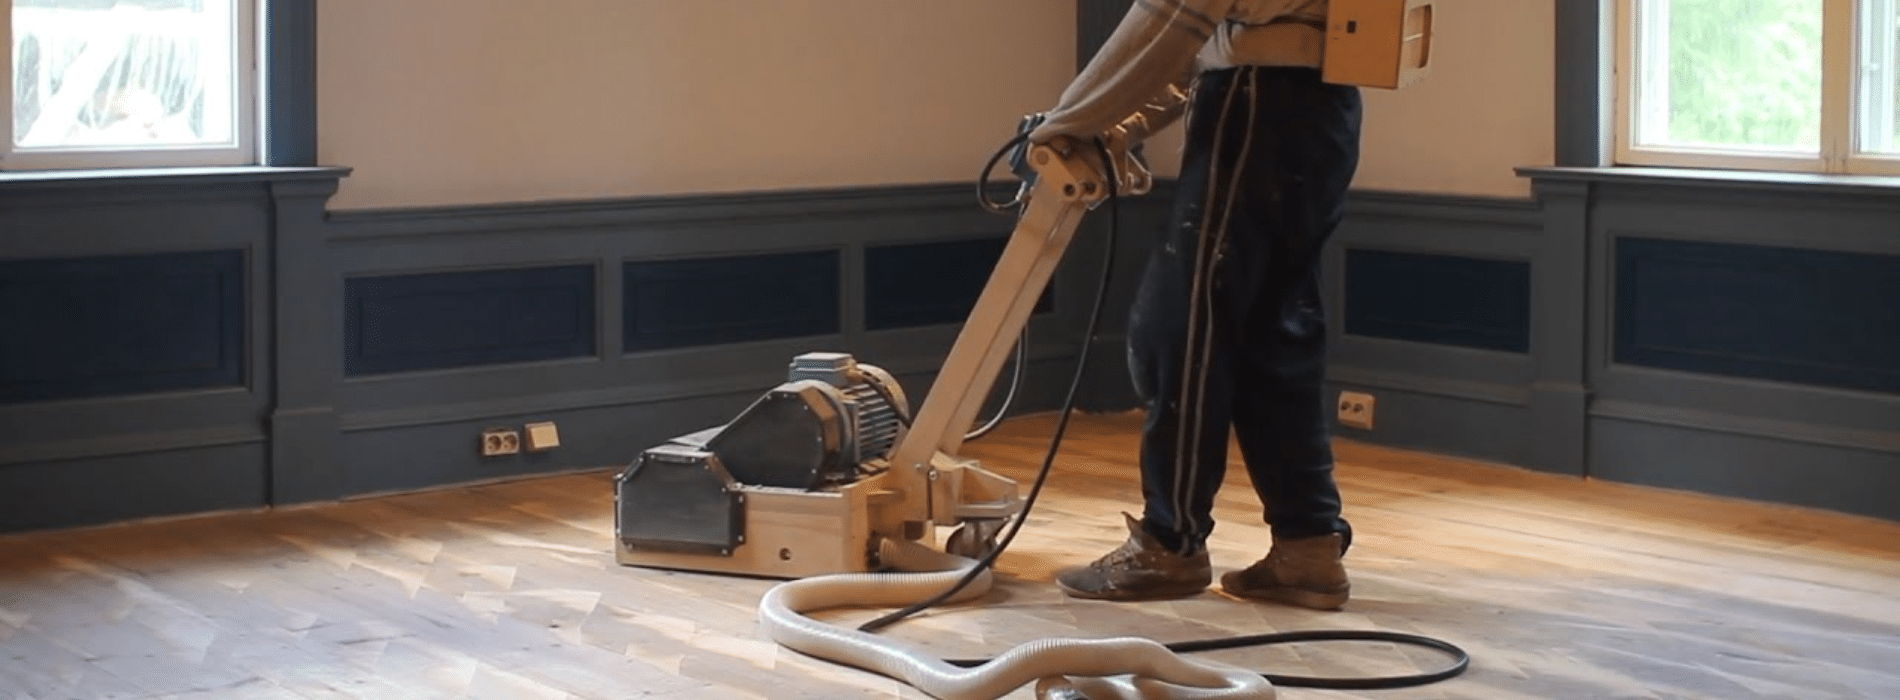 In South Tottenham, N15, Mr Sander® are using a Bona FlexiSand 1.9, a powerful buffer sander with a Ø 407 mm dimension and 1.9 kW effect. It operates on 230 V voltage and 50 Hz/60 Hz frequency. Connected to a dust extraction system with a HEPA filter, it ensures a clean and efficient sanding process.